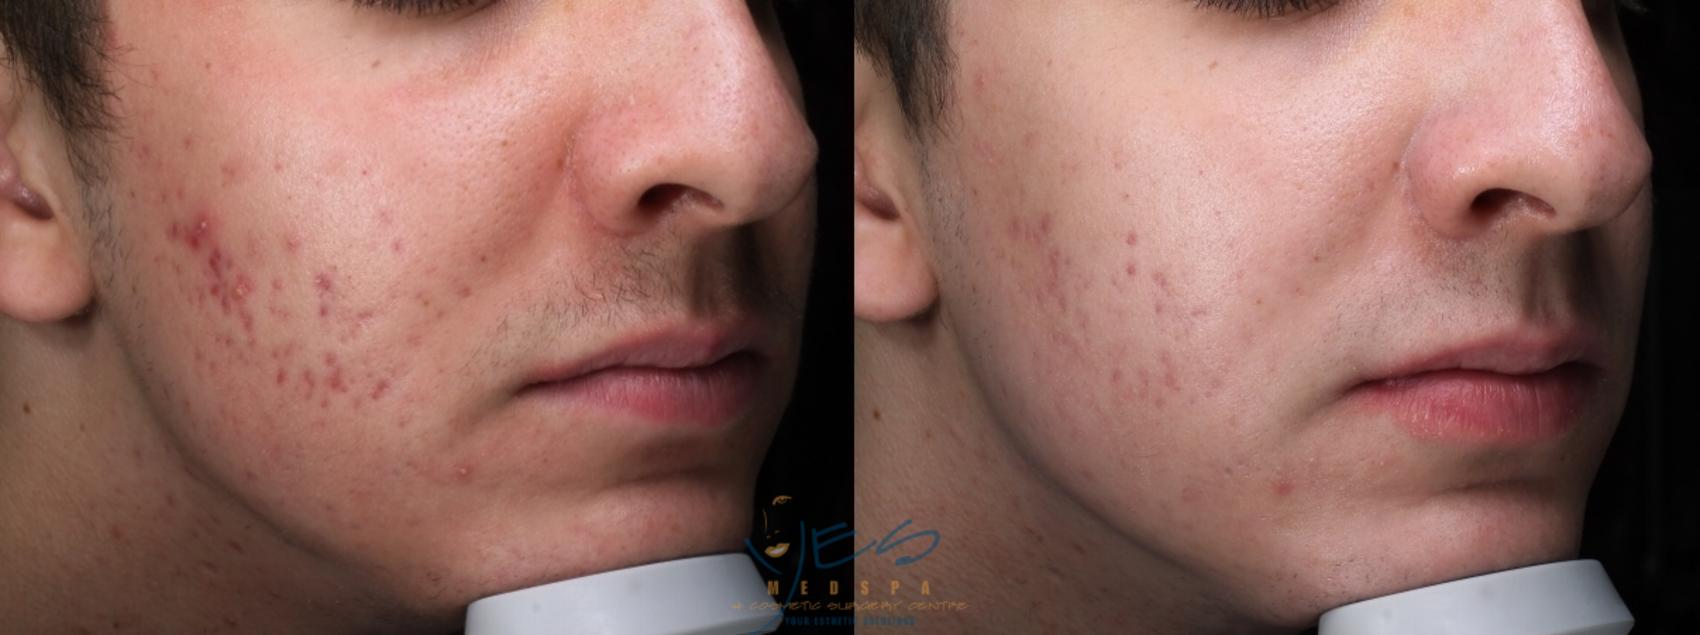 Before & After Skin Care Programs & Chemical Peels Case 395 Right Oblique View in Vancouver, BC